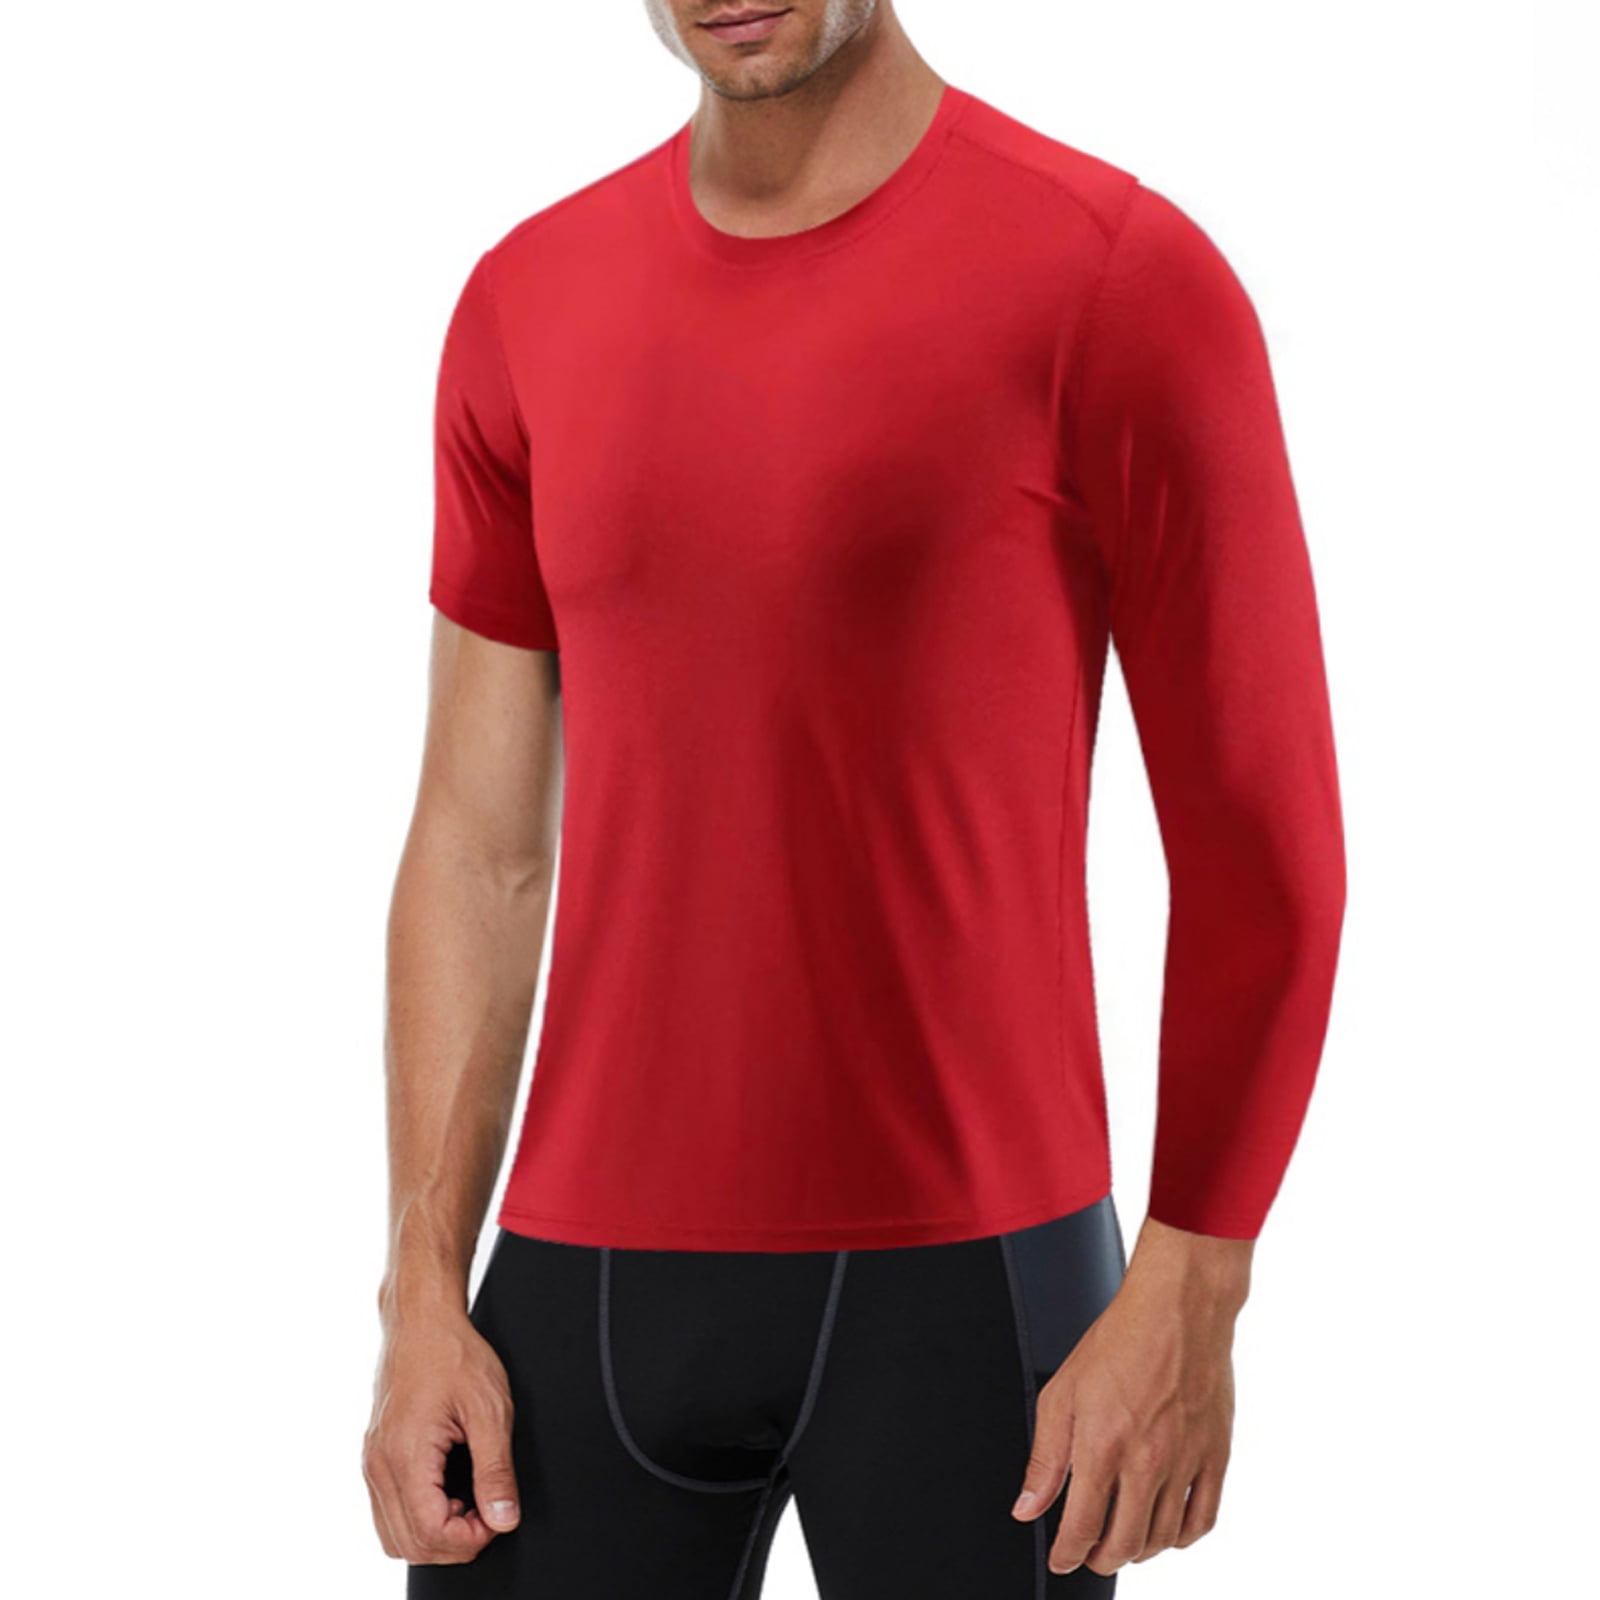 Xmarks Men's Quick Dry Compression Shirts 1/2 Single Arm Long Sleeve  Athletic Base Layer T Shirt Workout Running Tee Top Basketball Tights, S-3XL